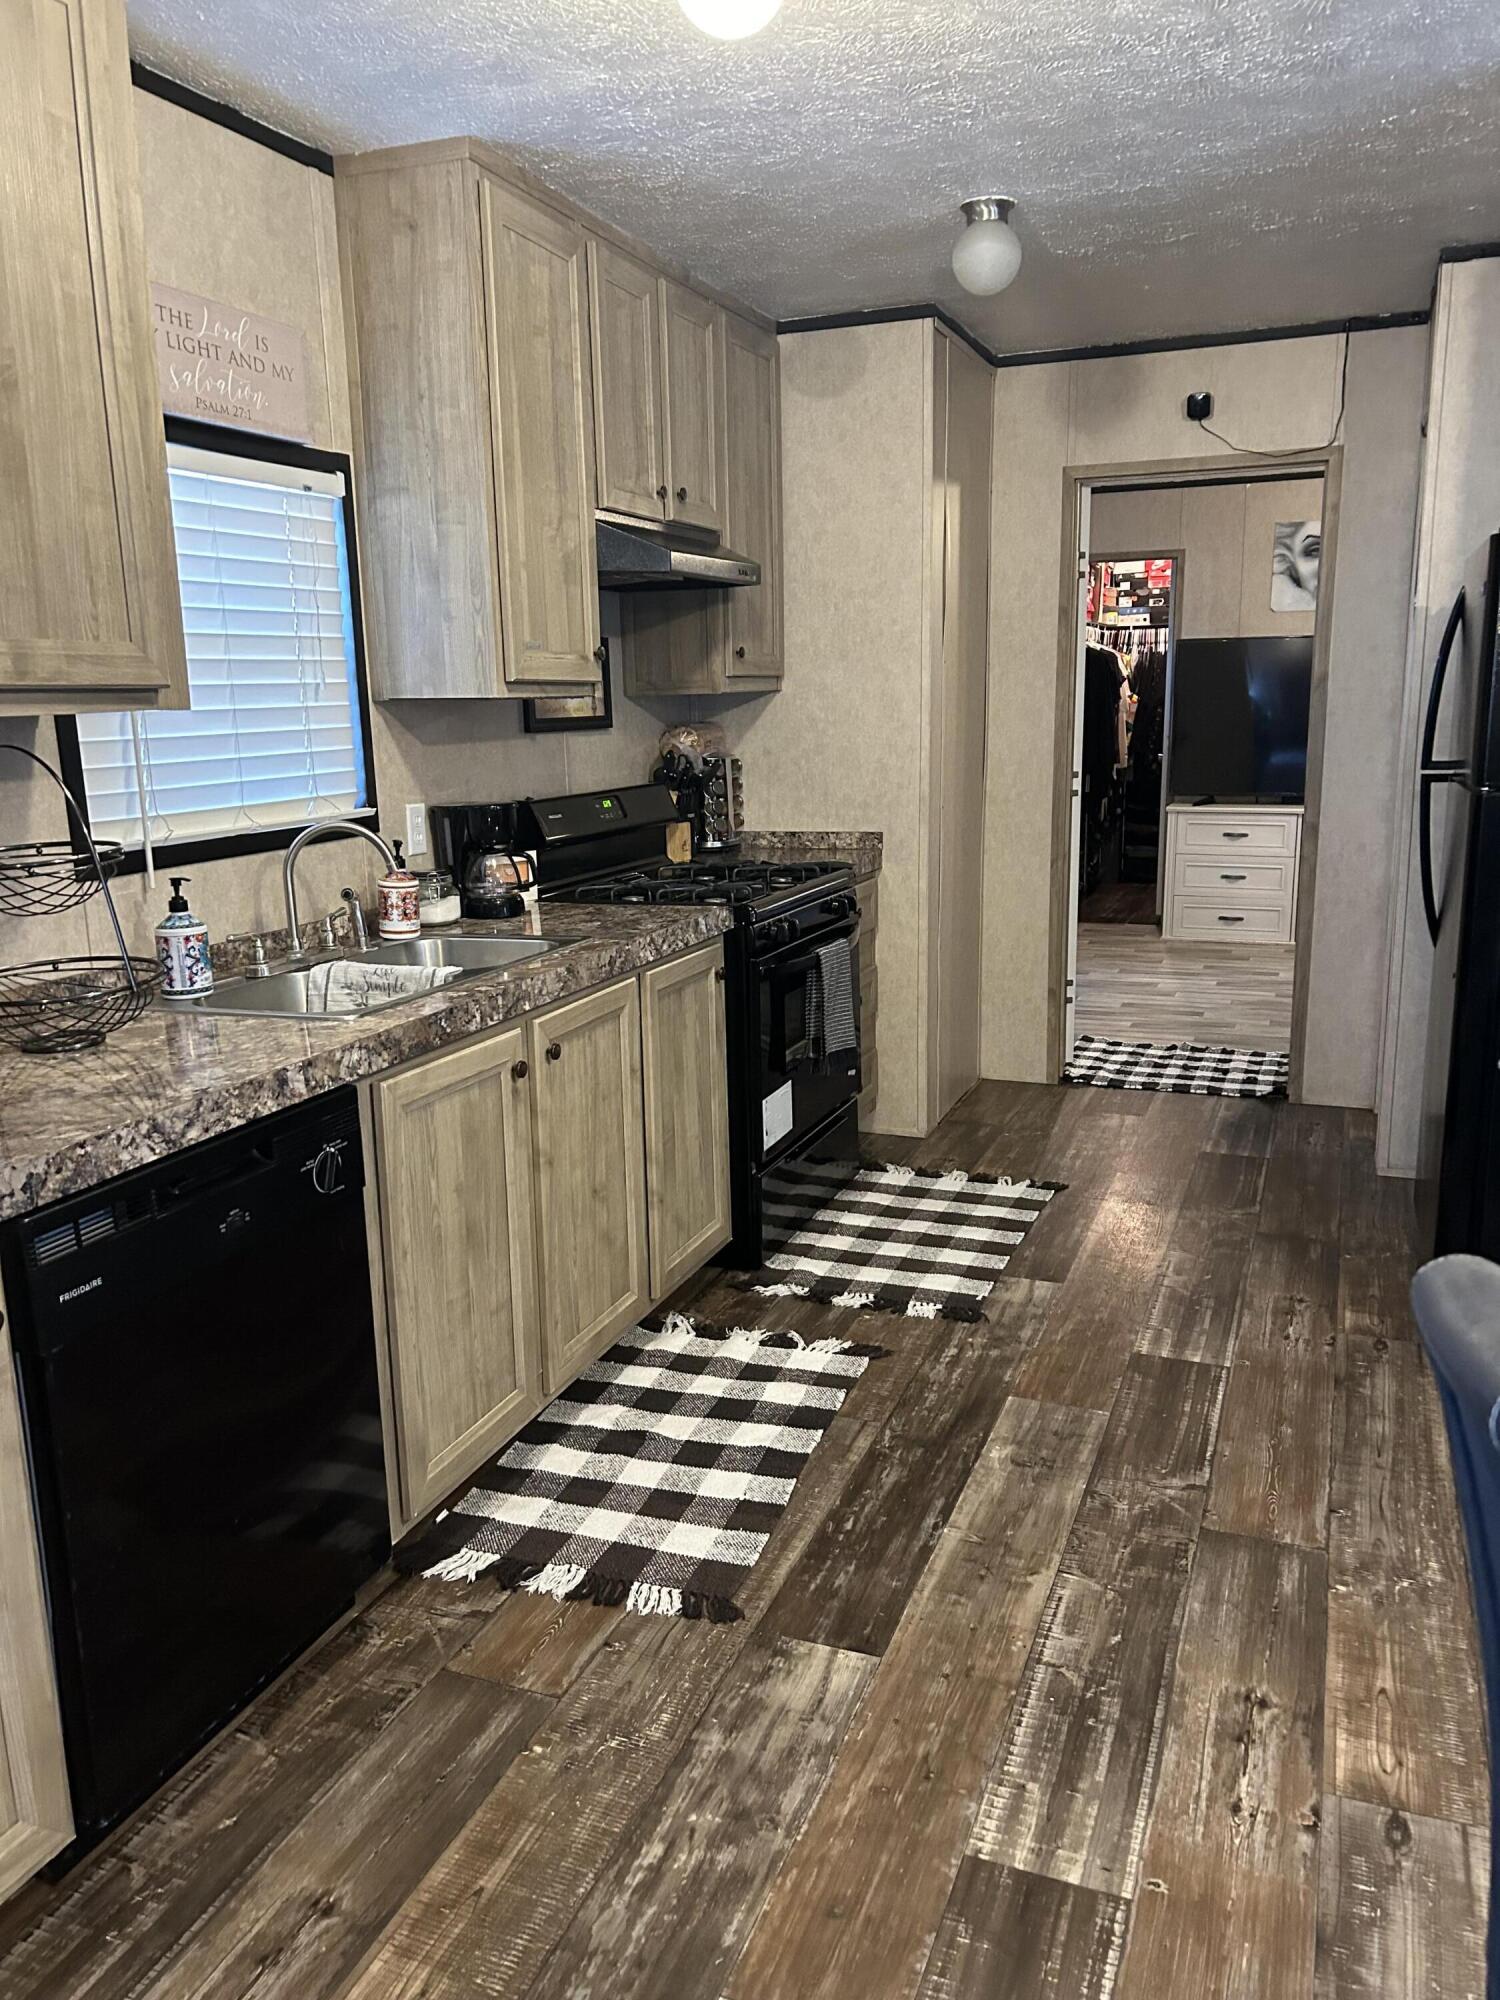 Cleanest and best well kept Manufactured home you have ever been in!!!Seller bought this unit brand new and has kept it immaculate. Come see for yourself. Decent side/back yard area for dogs or relaxing after a long day! Inside is spic and span with no carpet. two blocks from the playground and food trucks!